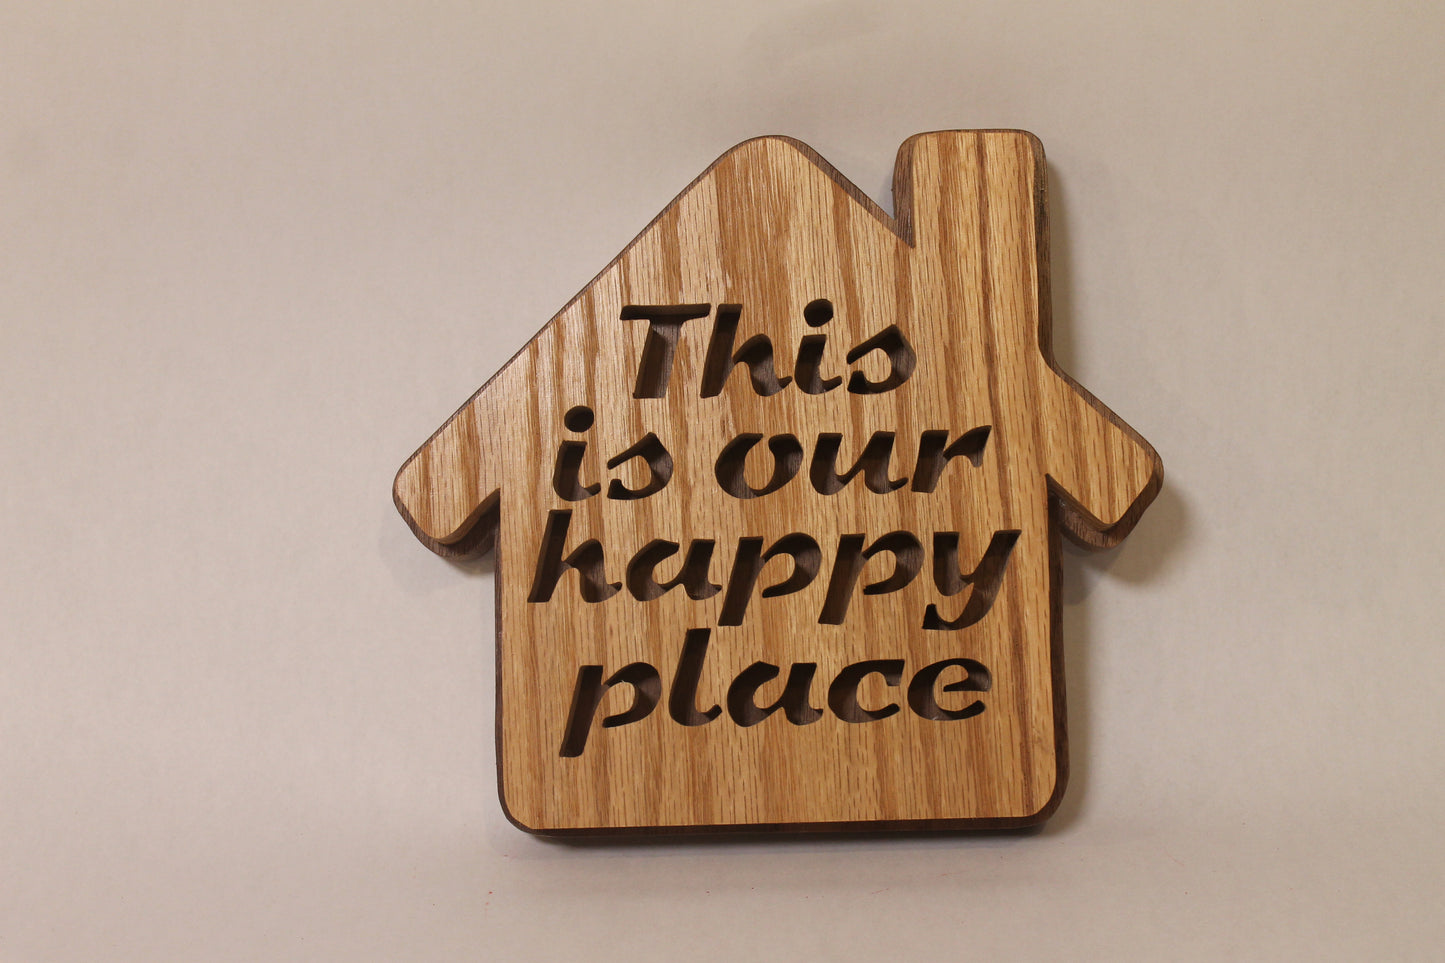 This is our happy place handcrafted house-shaped decoration